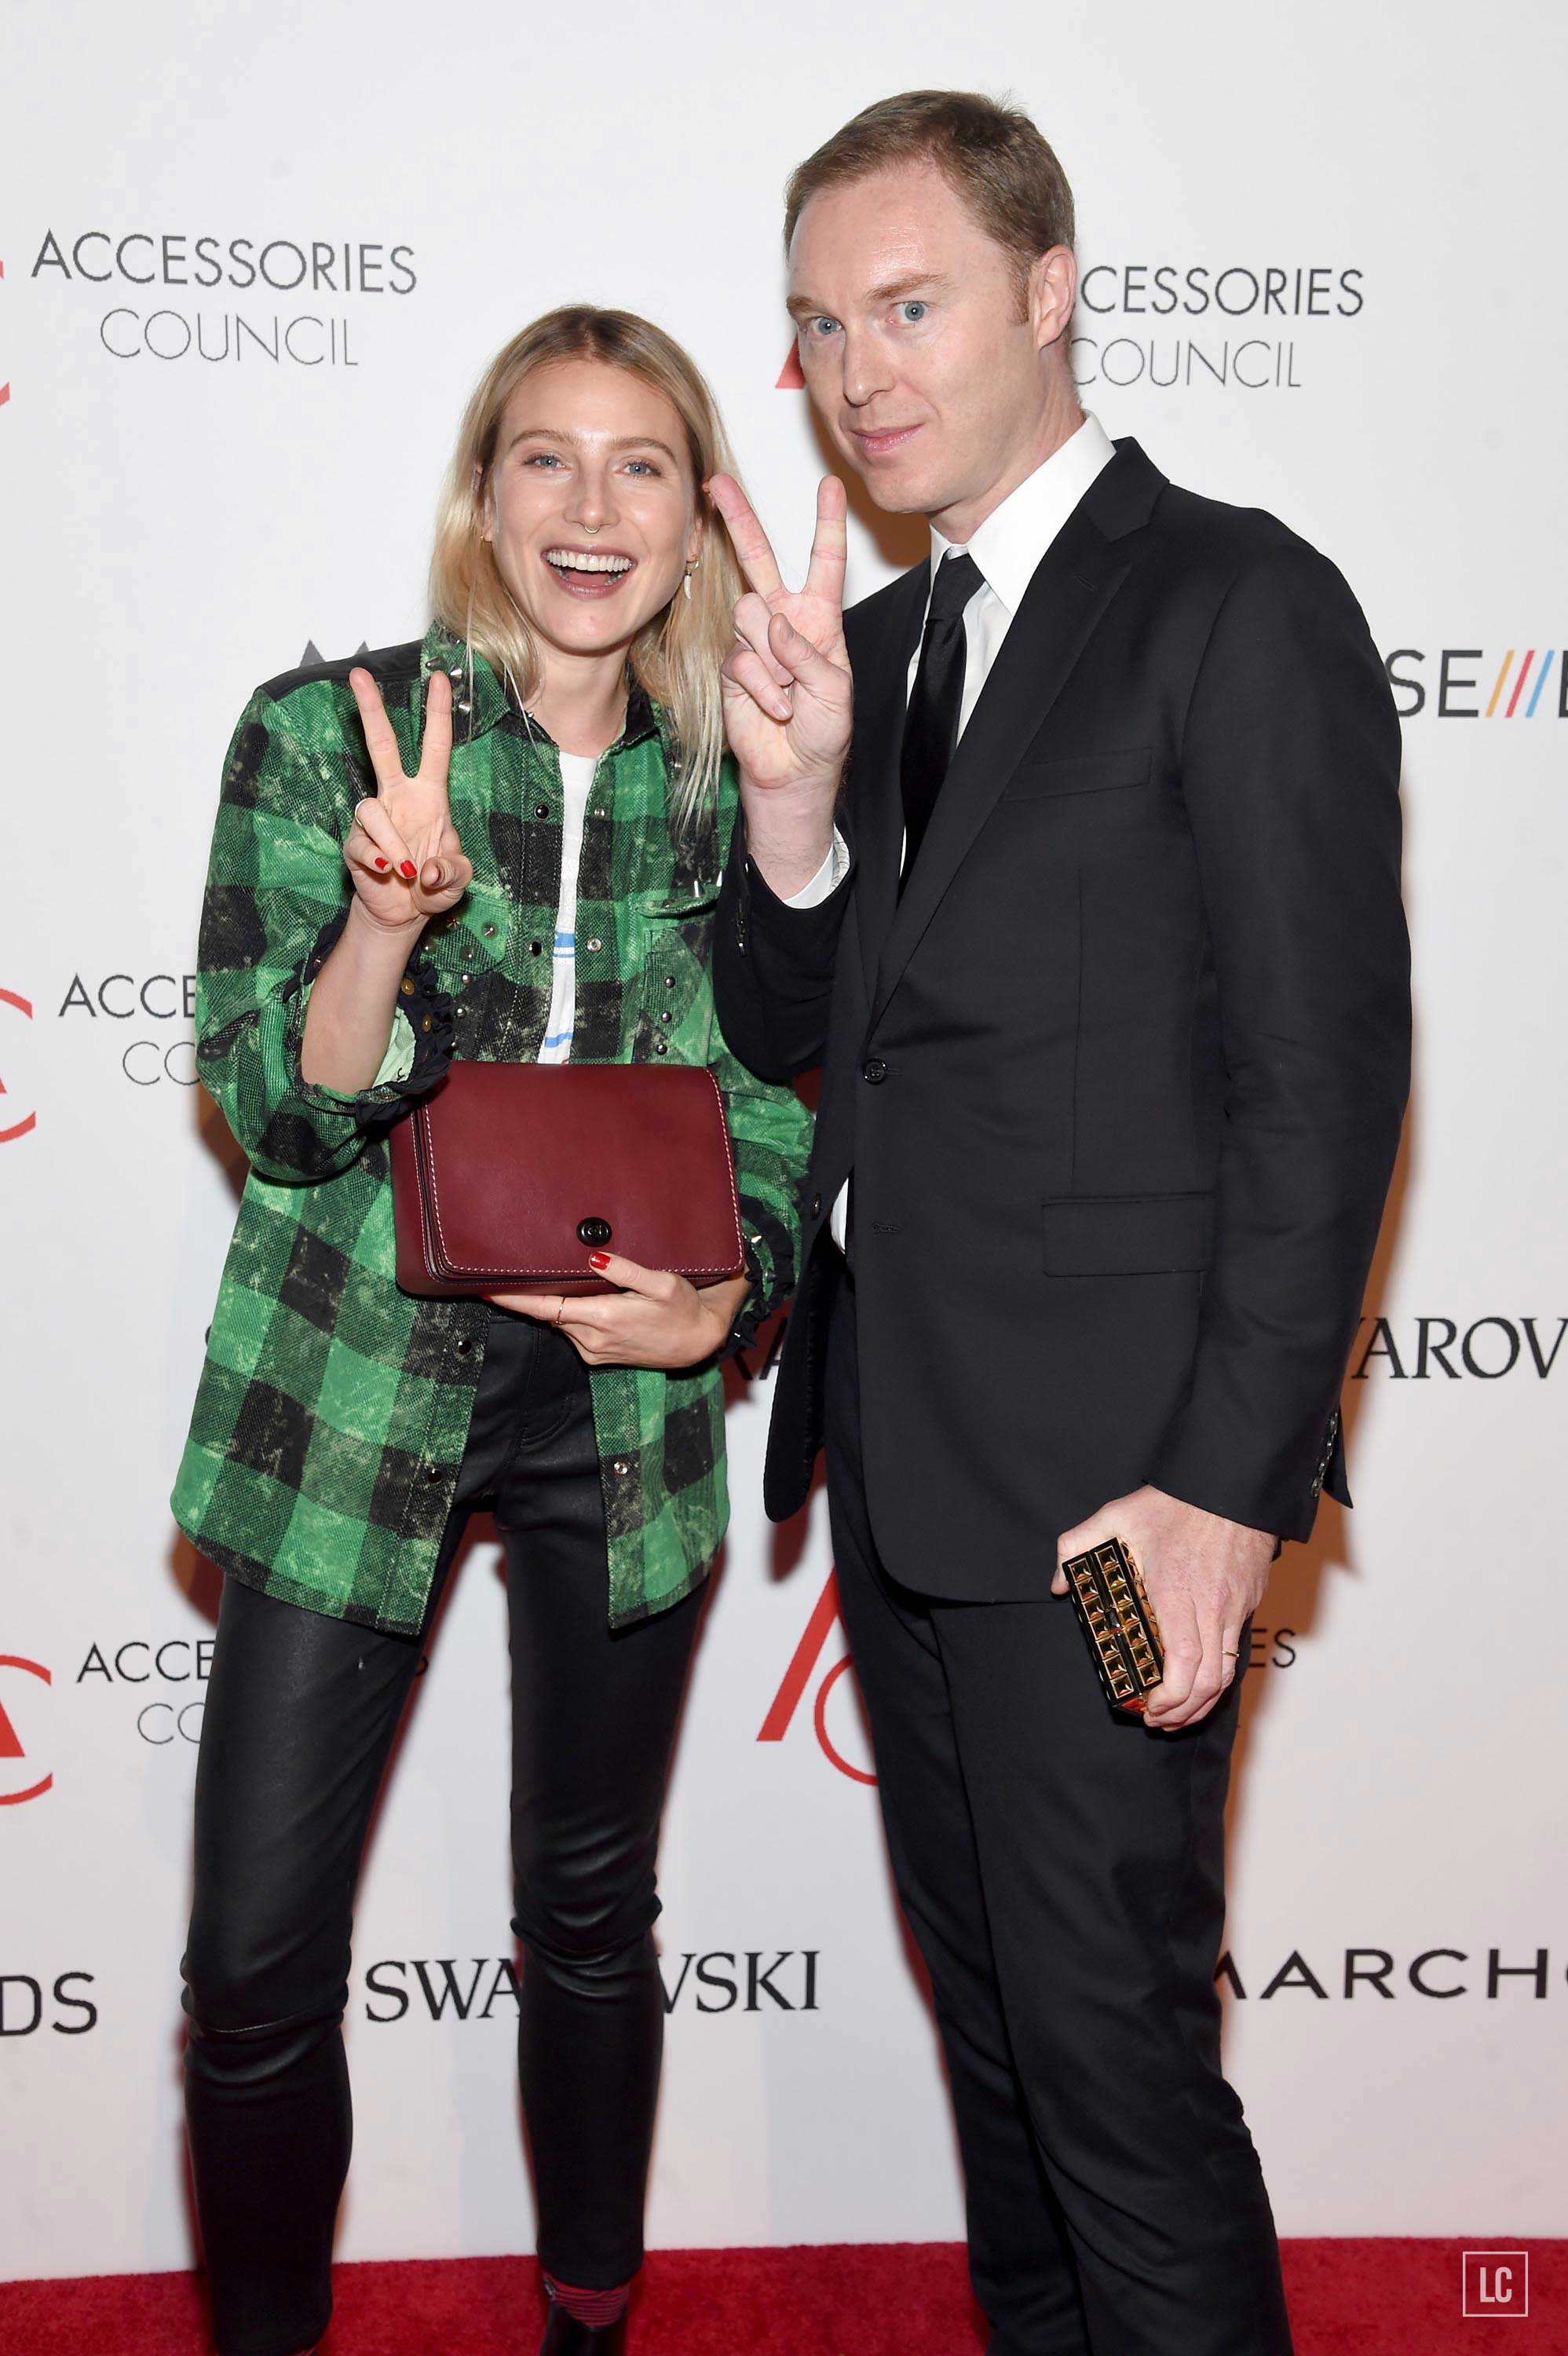 Dree Hemingway attends the Accessories Council 20th Anniversary celebration